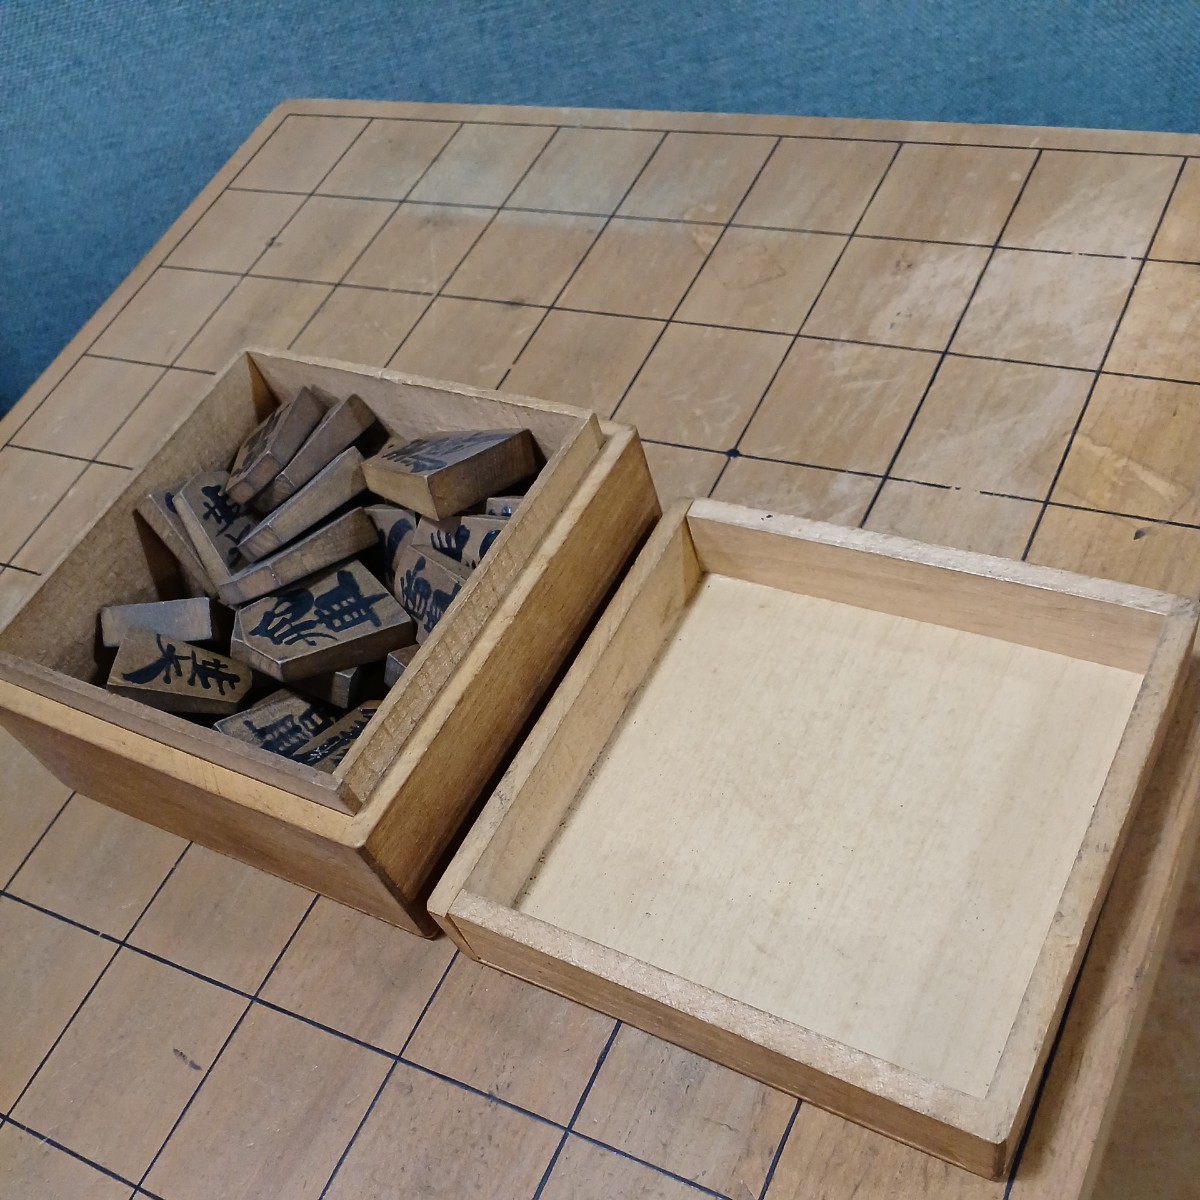  used long-term keeping goods retro shogi record shogi piece set pair attaching shogi record tree boxed tree piece wooden Vintage old Japanese-style house old .. purity? scratch dirt equipped present condition goods 